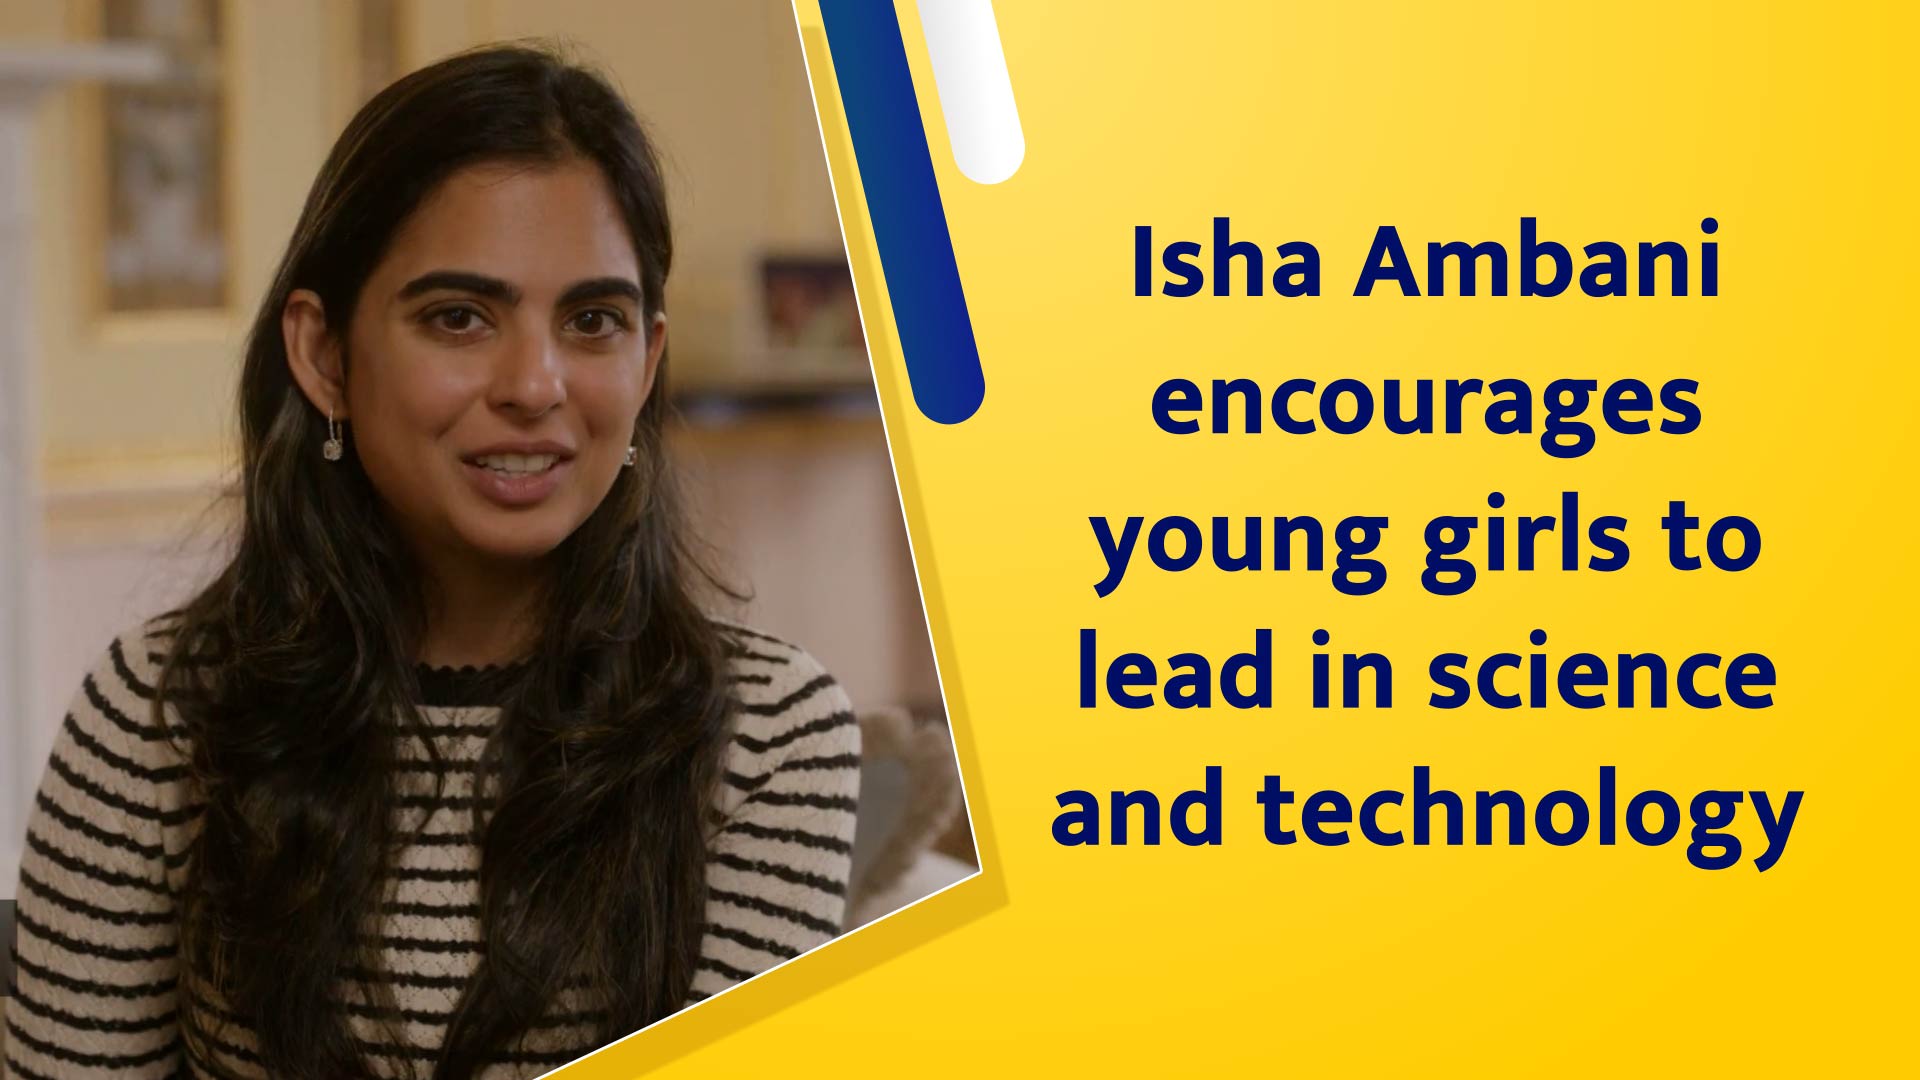 Isha Ambani encourages young girls to lead in science and technology